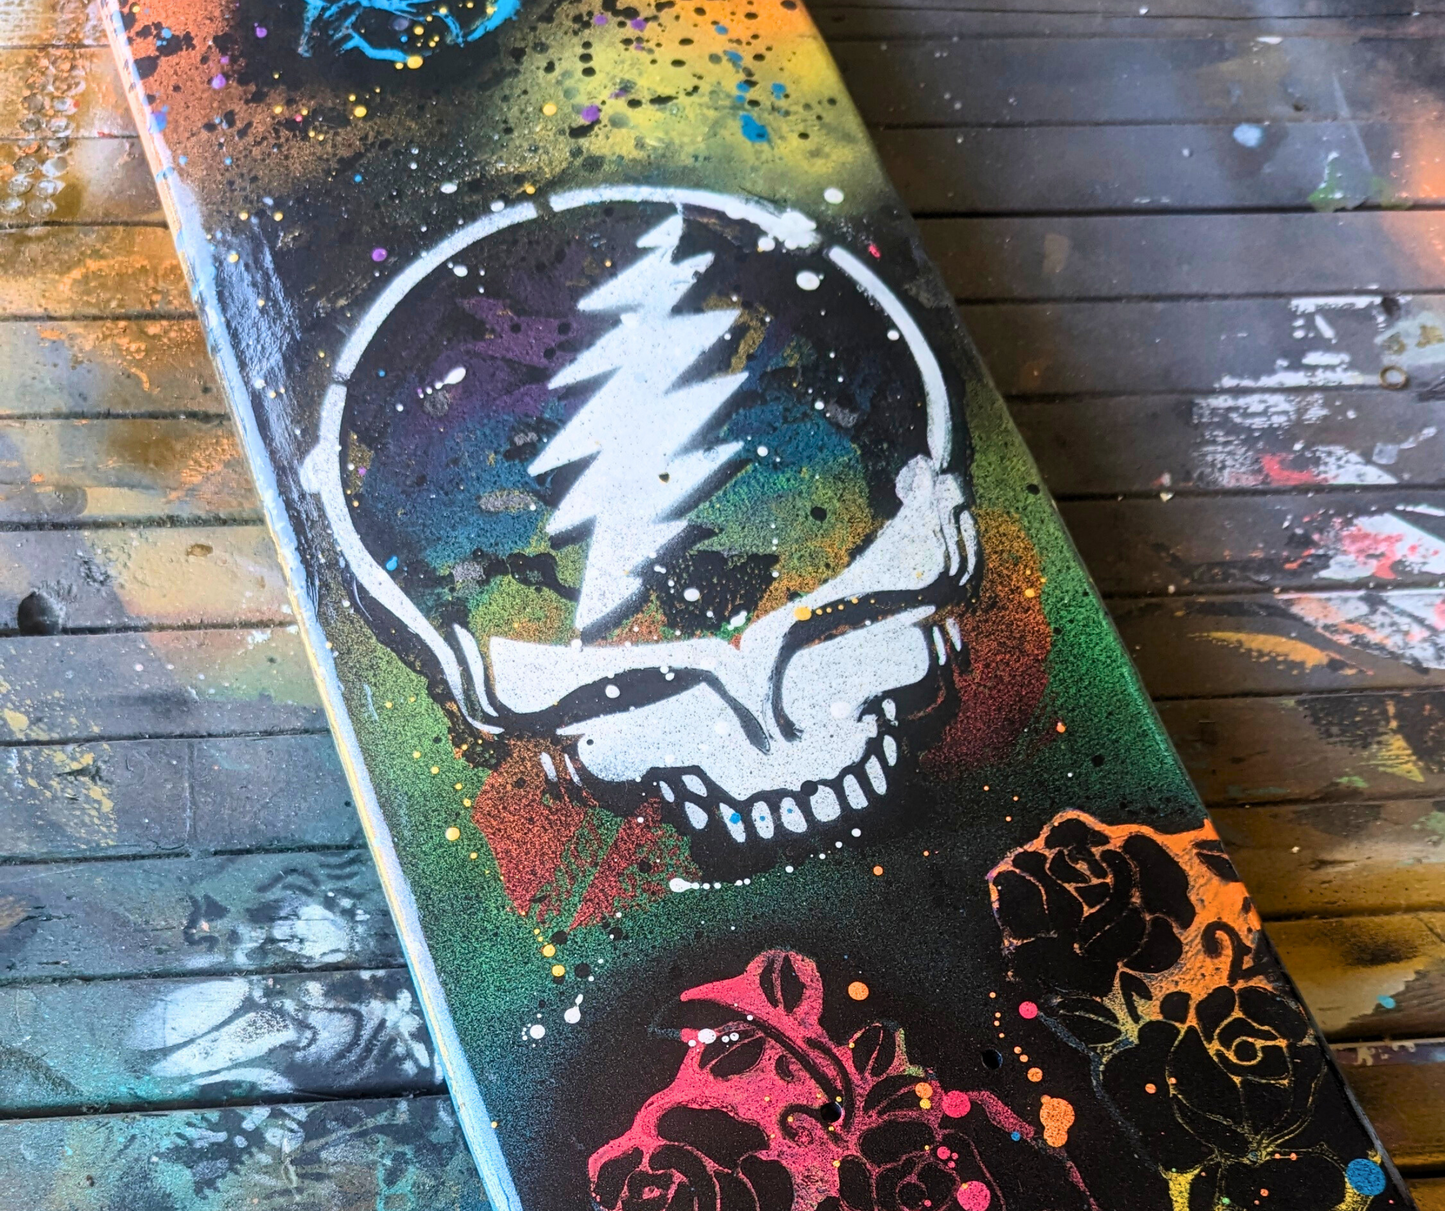 Stealie Bamboo Skateboard (Deck ONLY) Hand Painted Bespoke and Functional to ride or display